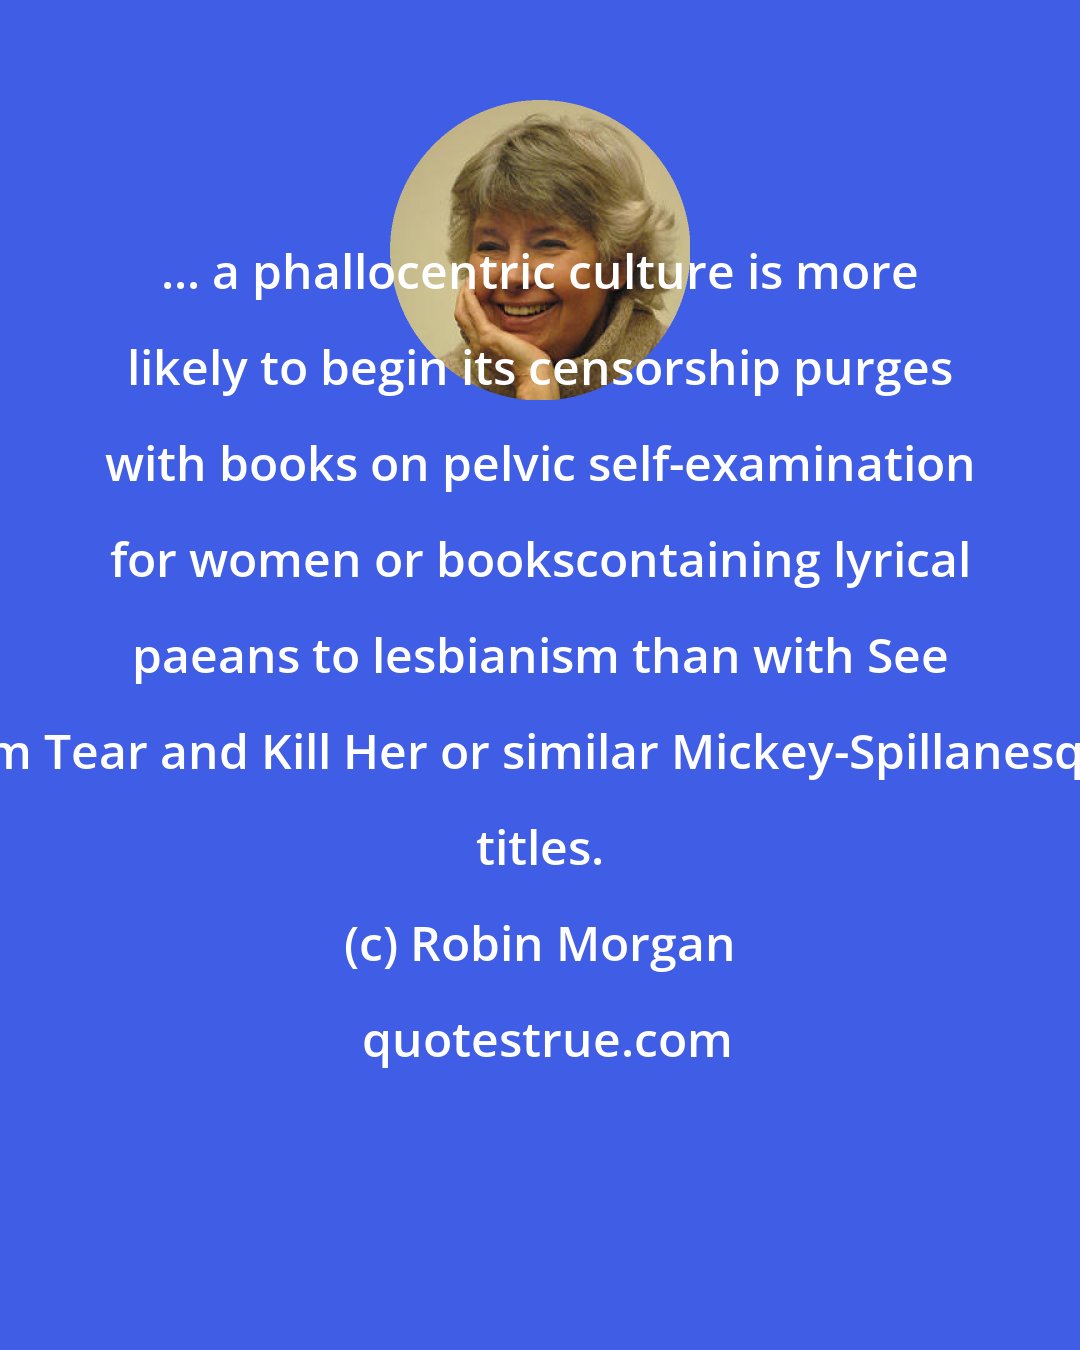 Robin Morgan: ... a phallocentric culture is more likely to begin its censorship purges with books on pelvic self-examination for women or bookscontaining lyrical paeans to lesbianism than with See Him Tear and Kill Her or similar Mickey-Spillanesque titles.